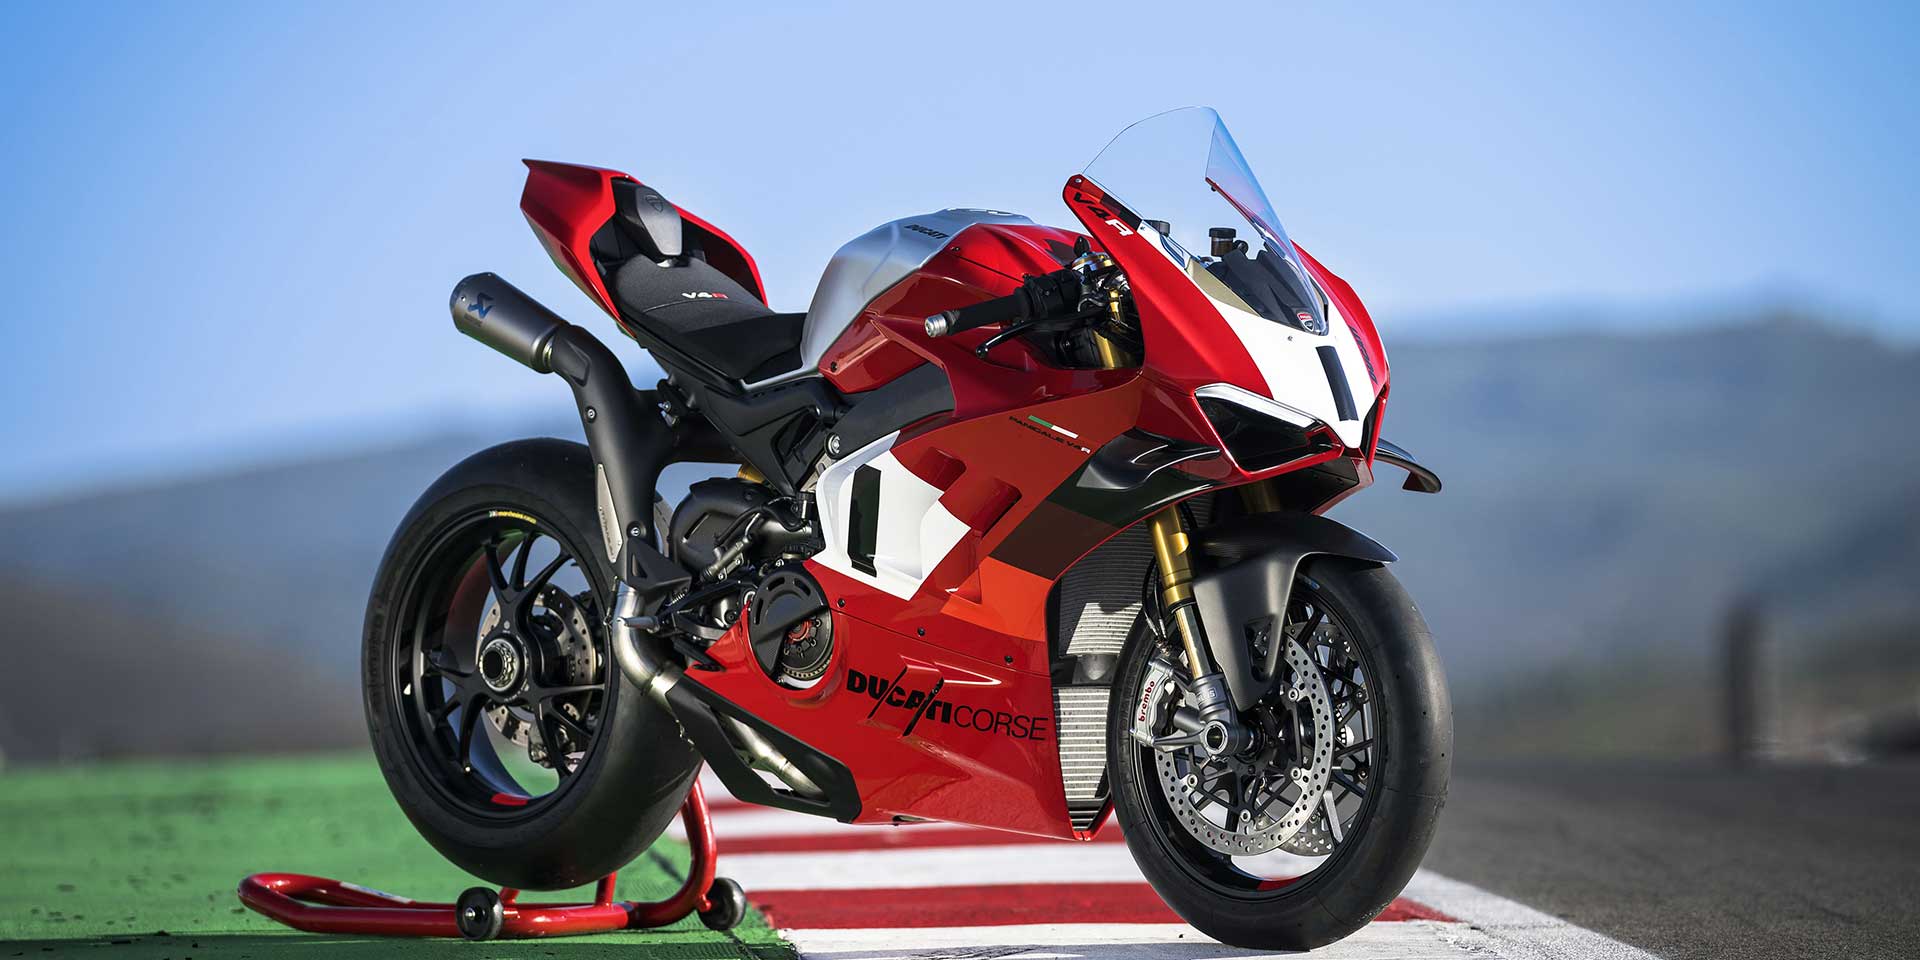 Ducati Presents the New Panigale V4 R: Over 240 hp in Track Setup, Limiter  at 16,500 rpm